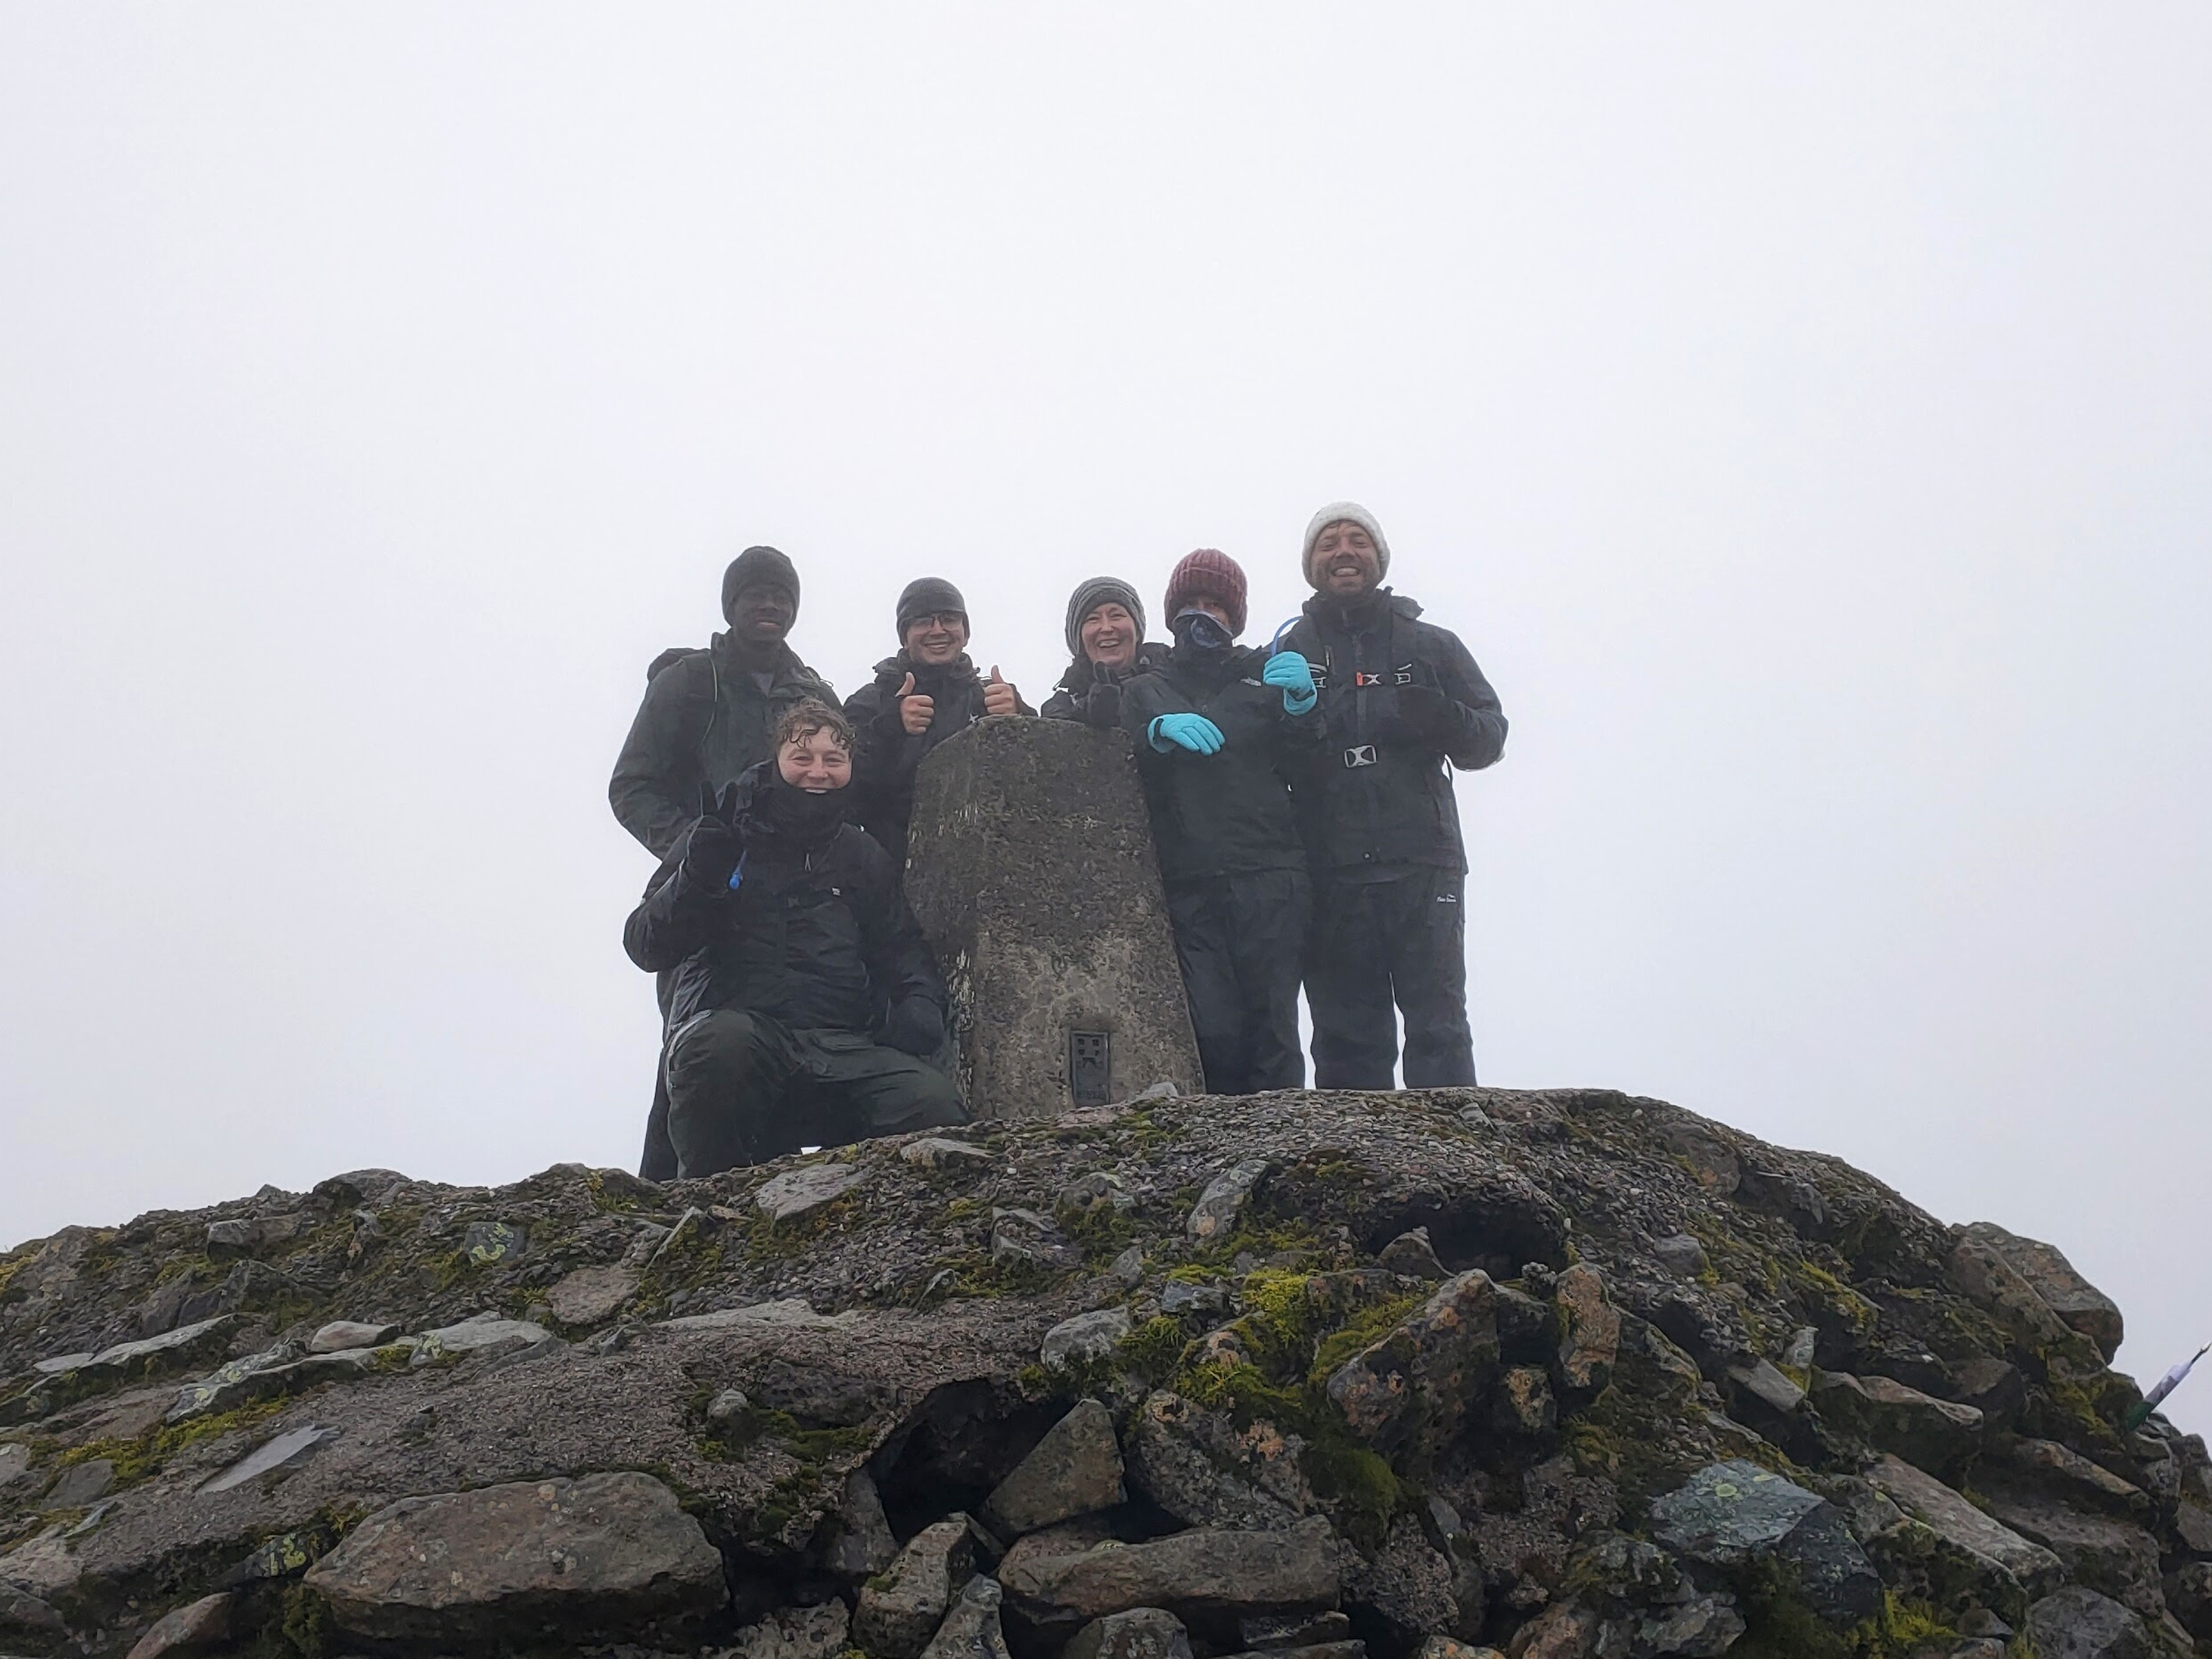 The team at the top of Ben Nevis. Image is six people on top of a craggy summit, wearing wet weather gear